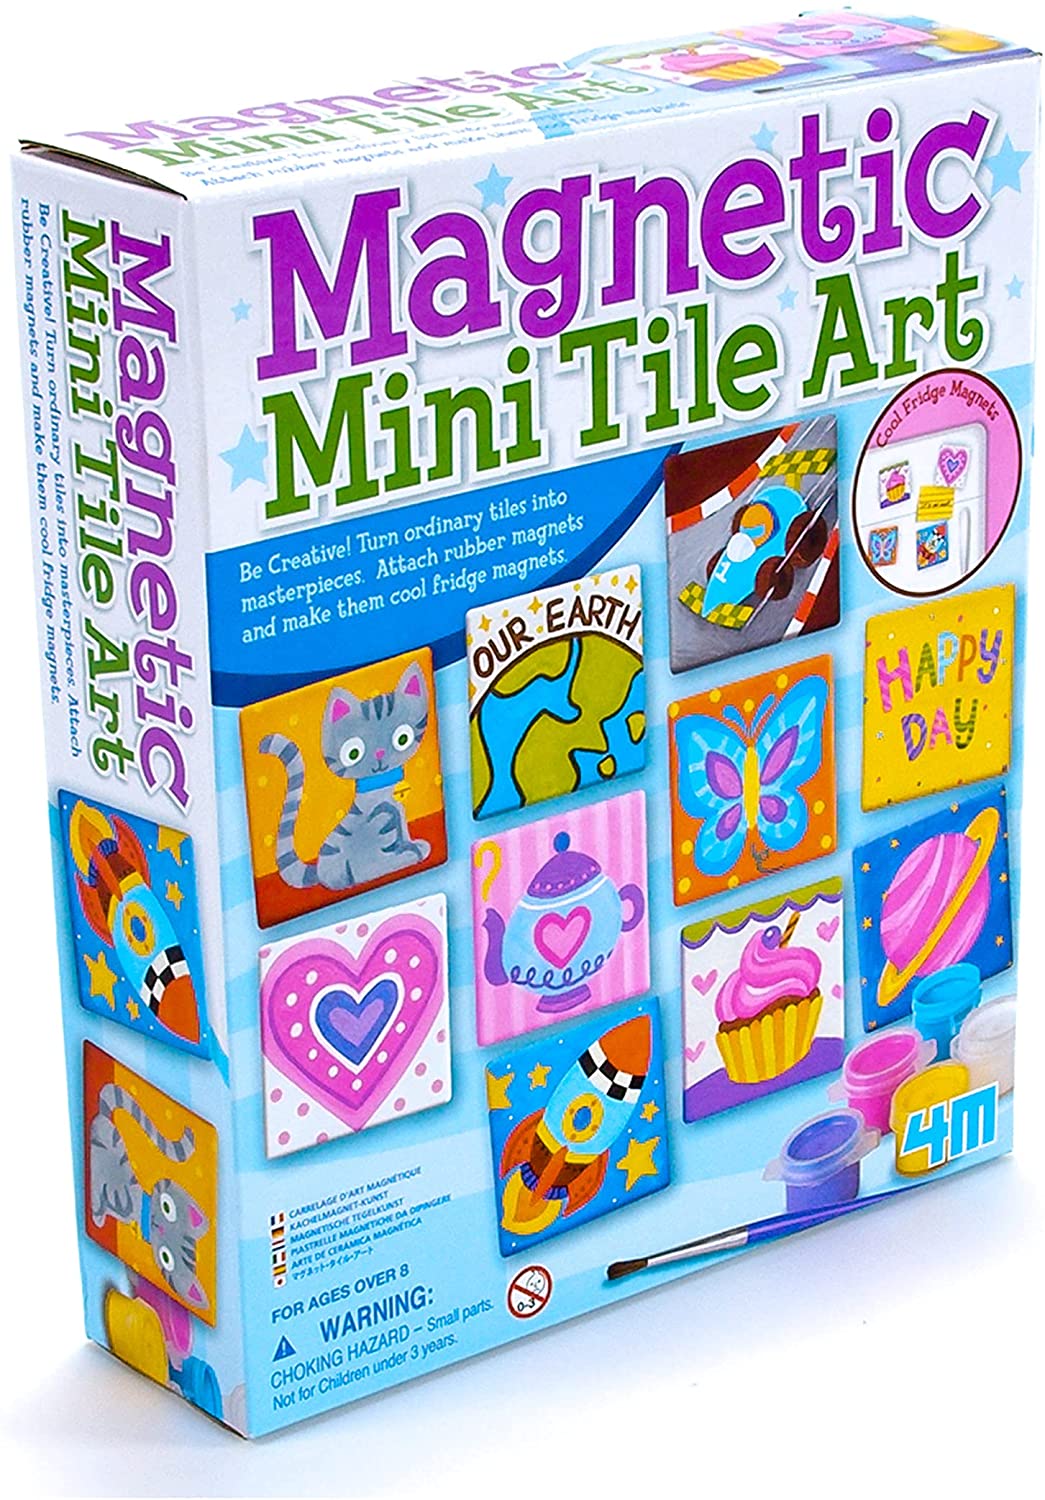 https://www.dontwasteyourmoney.com/wp-content/uploads/2022/03/4m-magnetic-mini-tile-painting-art-kit-for-9-12-year-olds-art-kits-for-9-12-year-olds.jpg